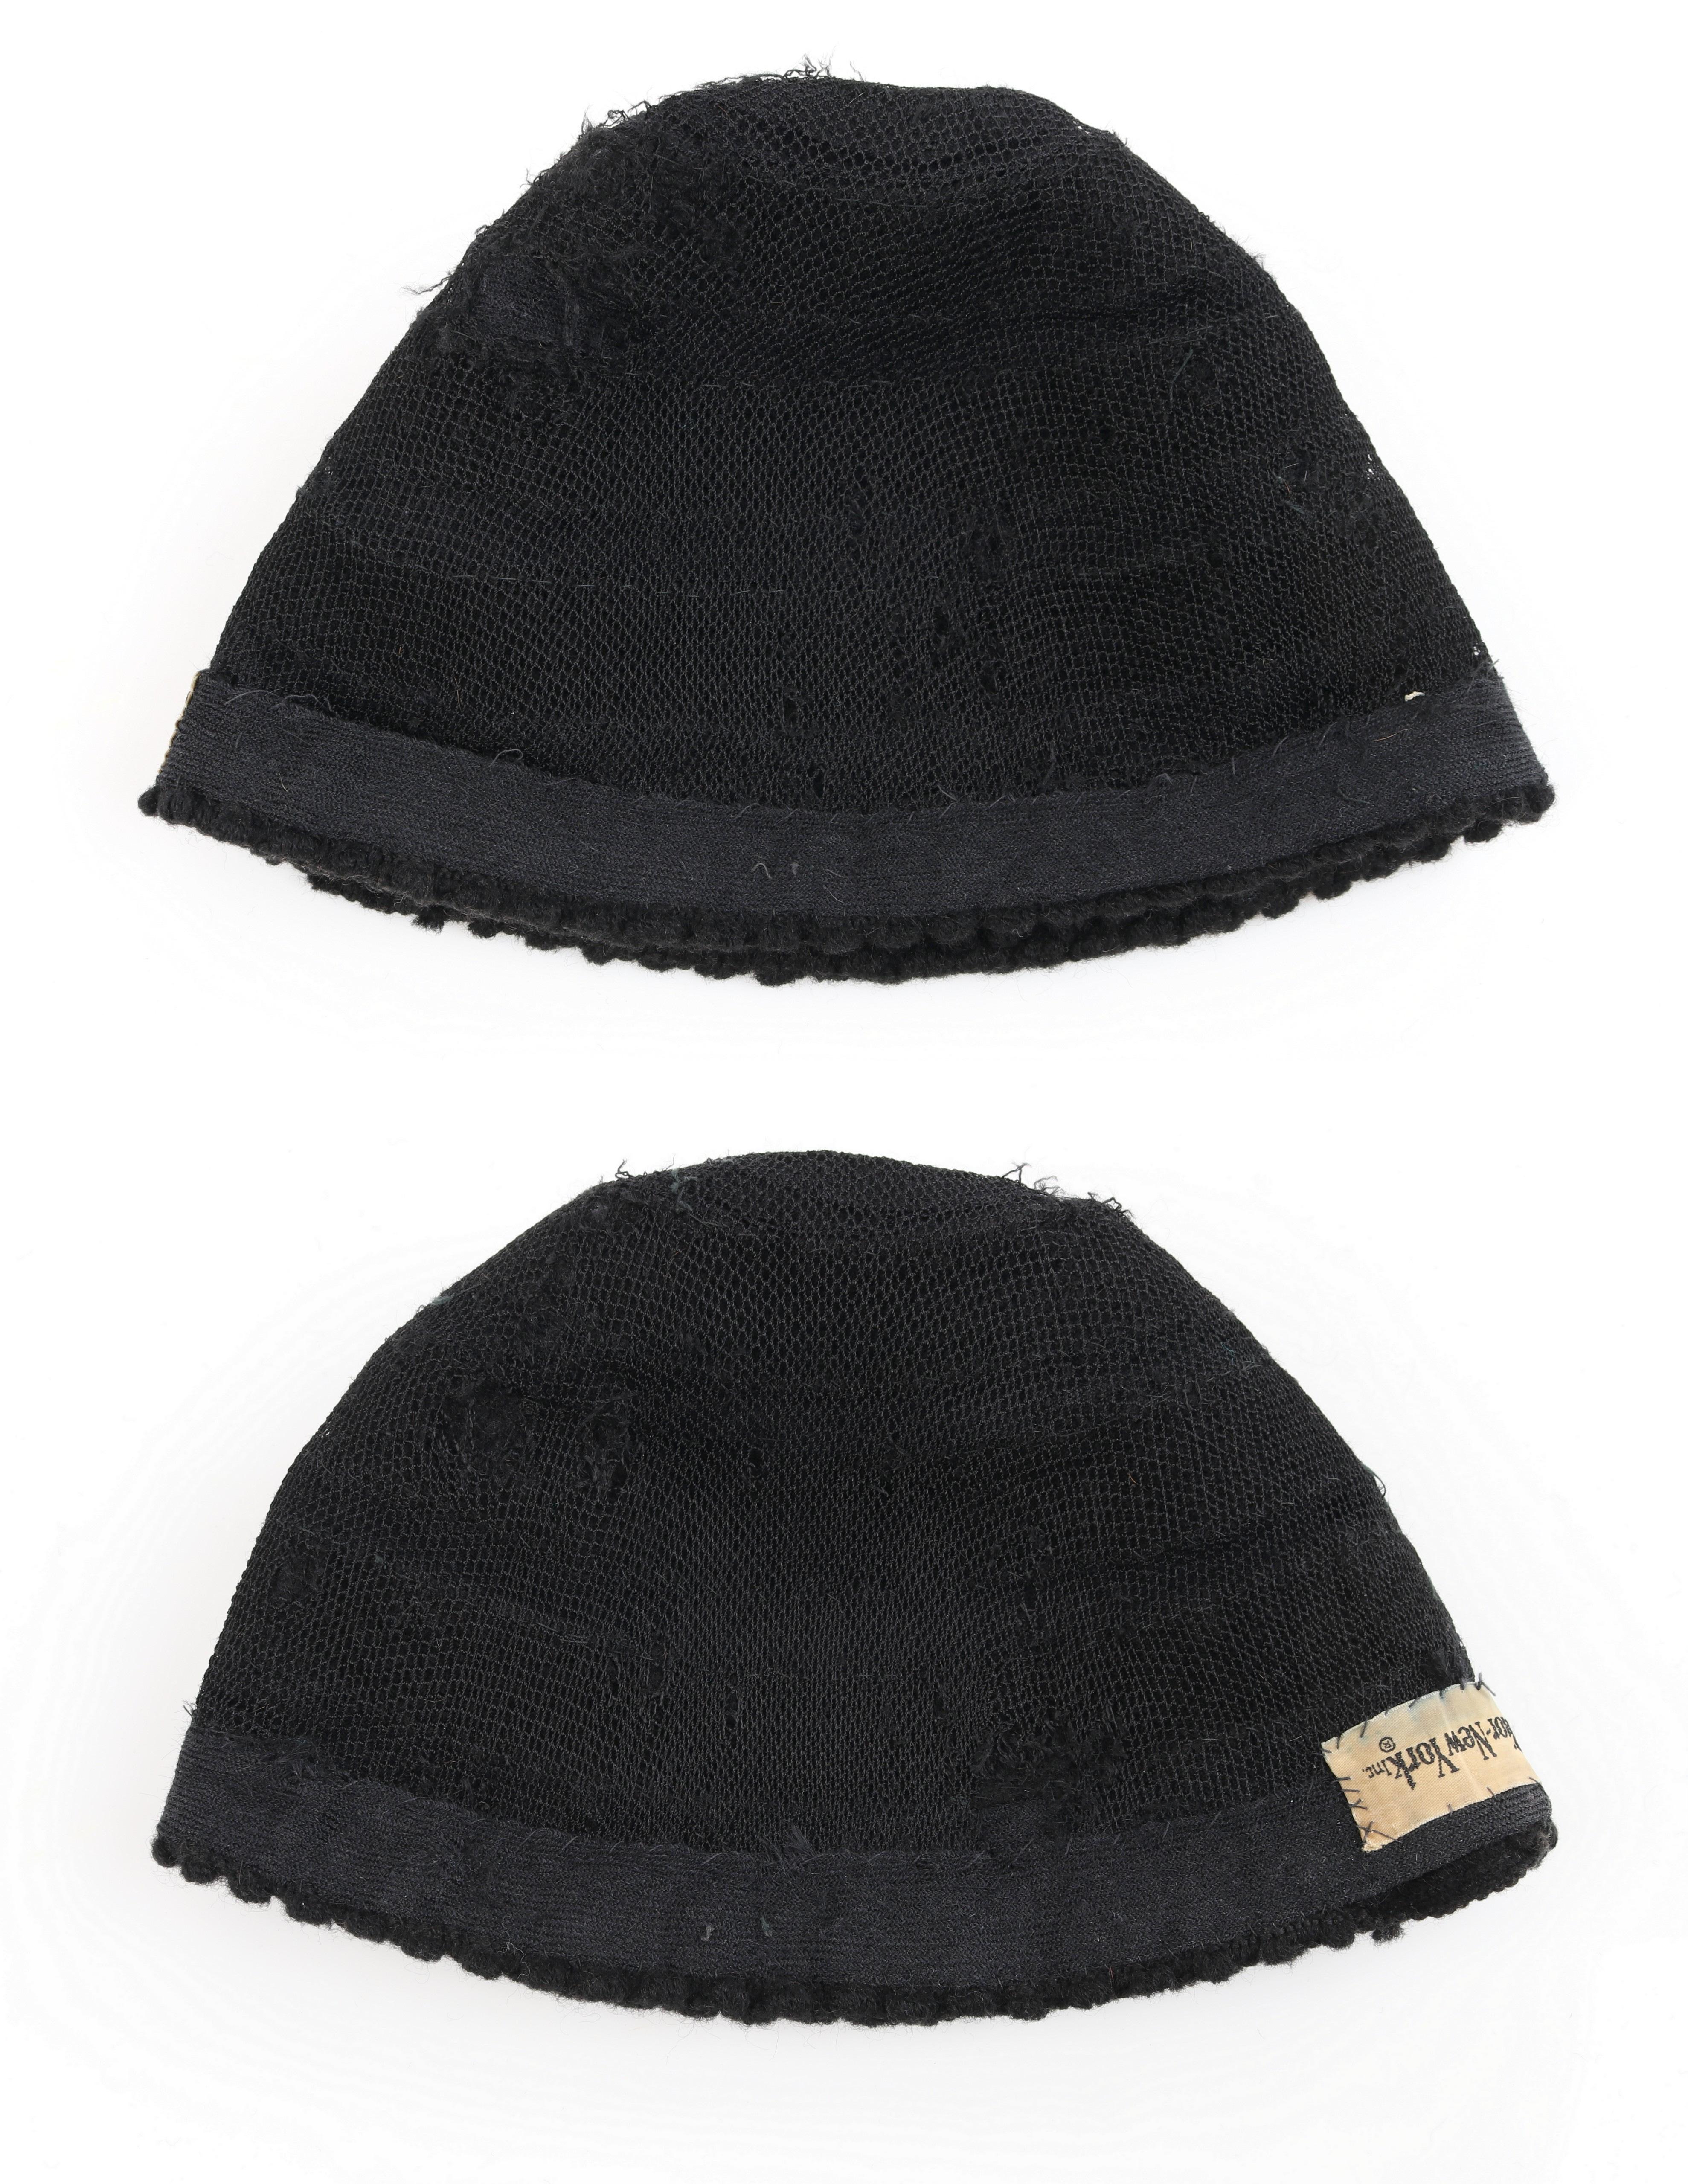 CHRISTIAN DIOR Early c.1960’s Couture Black Crochet Knit Layered Cap Hat  4